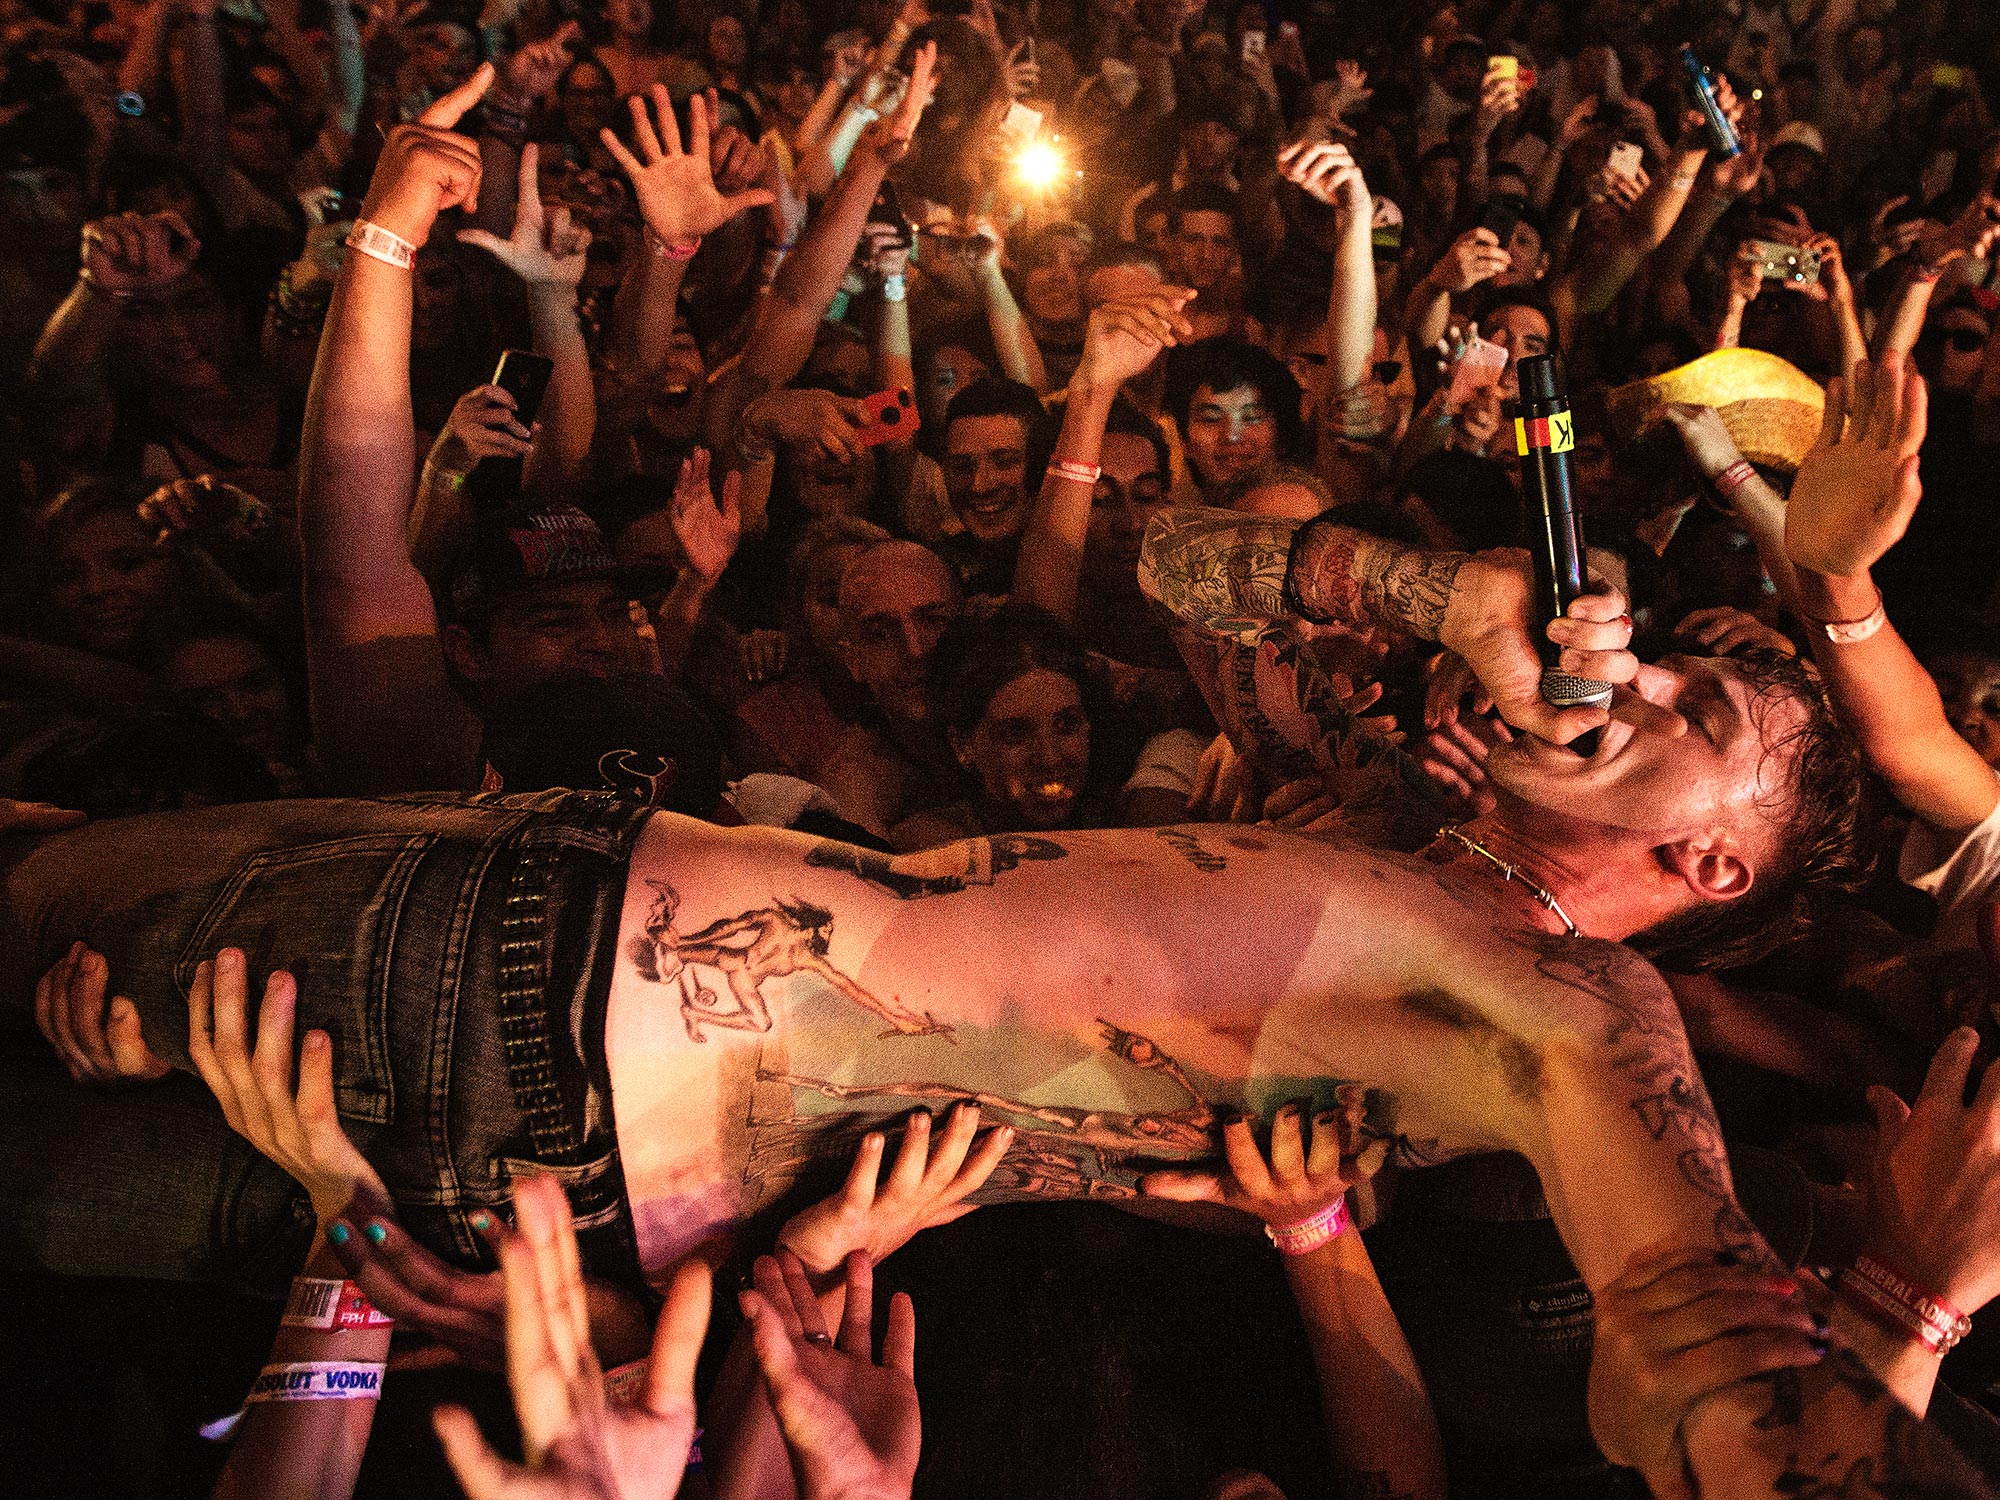 Machine Gun Kelly,  hip hop artist, performs at the Free Press Summer Fest music festival, in Houston, Texas, photographed by Houston music photographer, Todd Spoth.